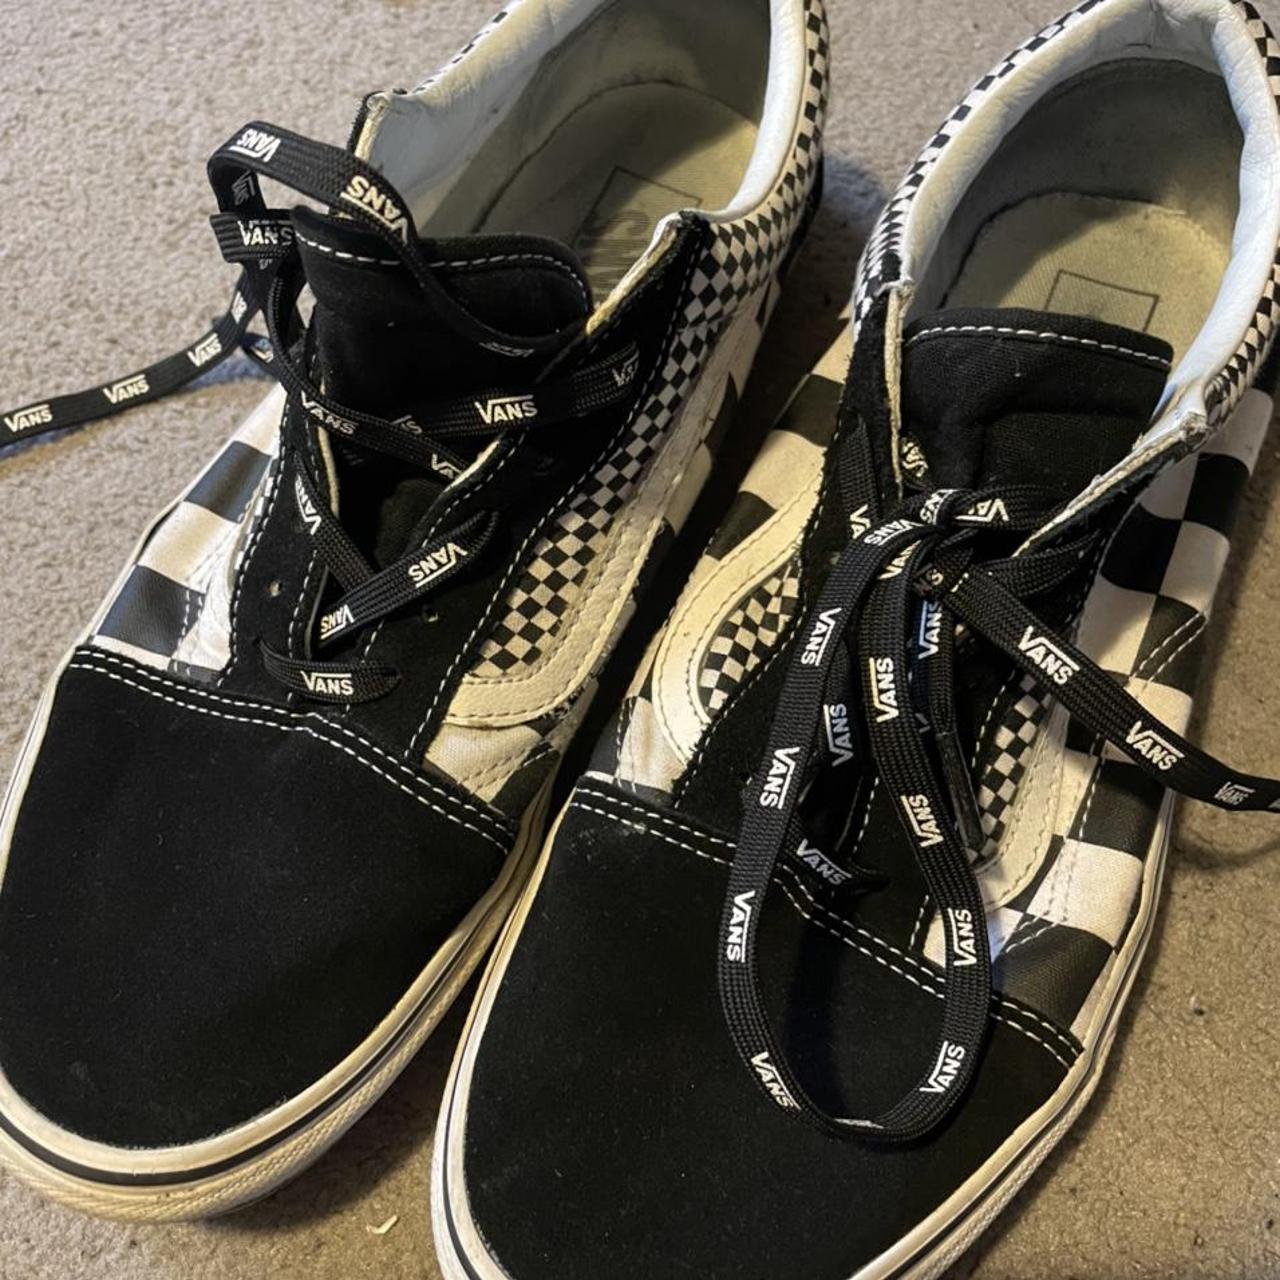 Vans Men's Black and White Trainers